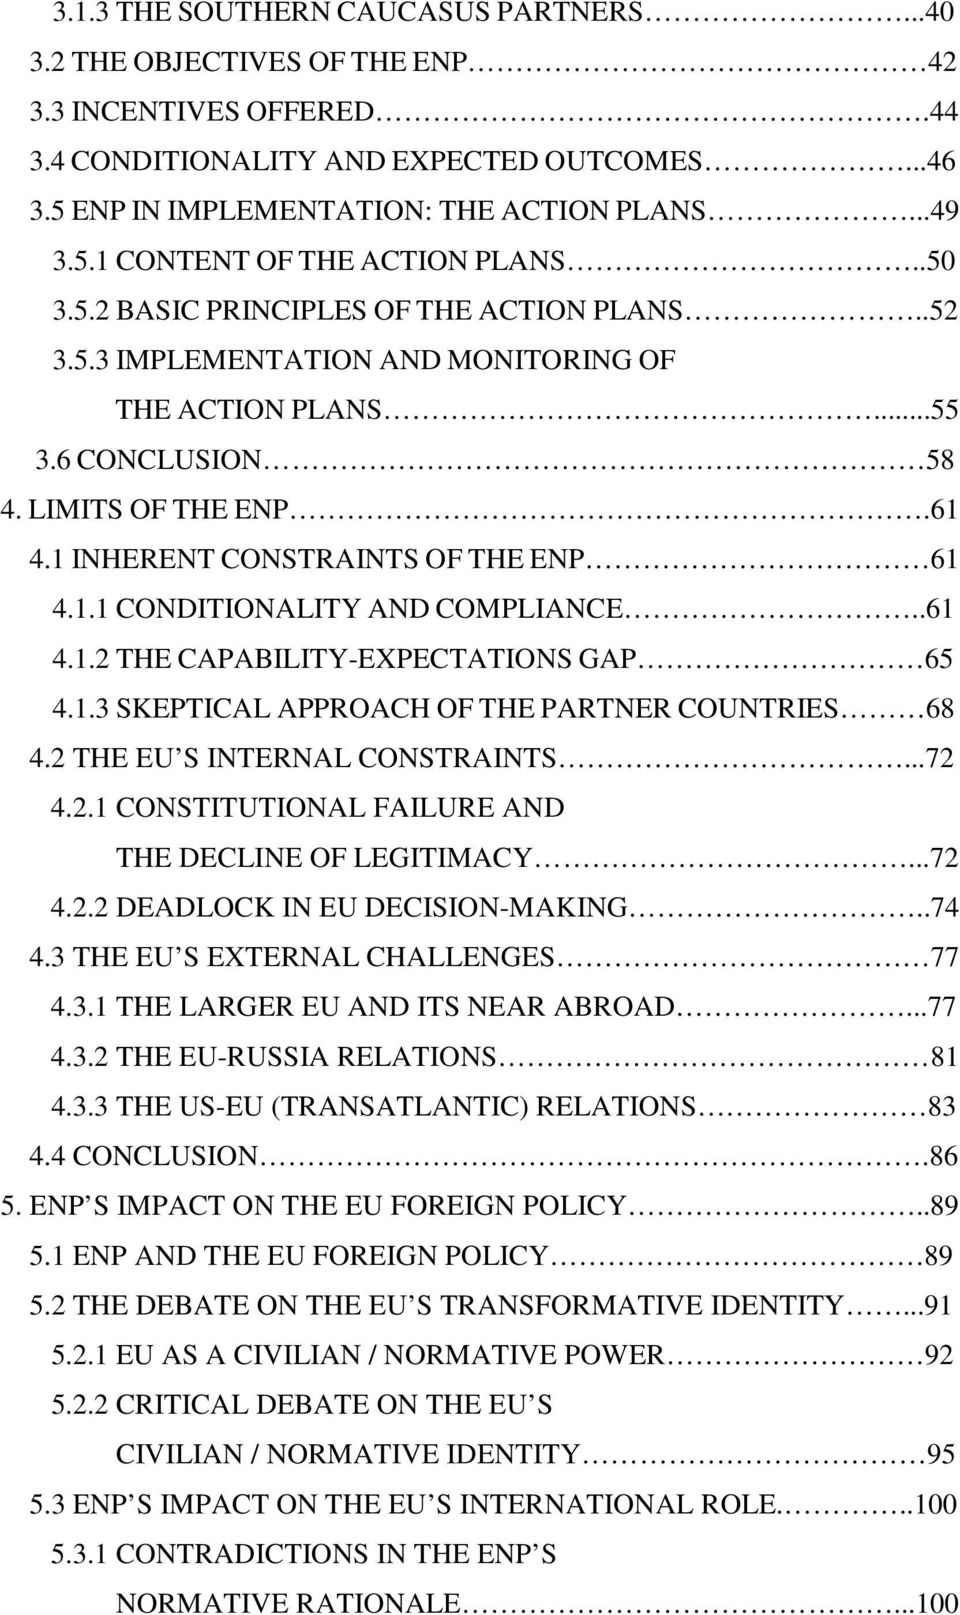 .61 4.1.2 THE CAPABILITY-EXPECTATIONS GAP 65 4.1.3 SKEPTICAL APPROACH OF THE PARTNER COUNTRIES 68 4.2 THE EU S INTERNAL CONSTRAINTS...72 4.2.1 CONSTITUTIONAL FAILURE AND THE DECLINE OF LEGITIMACY.